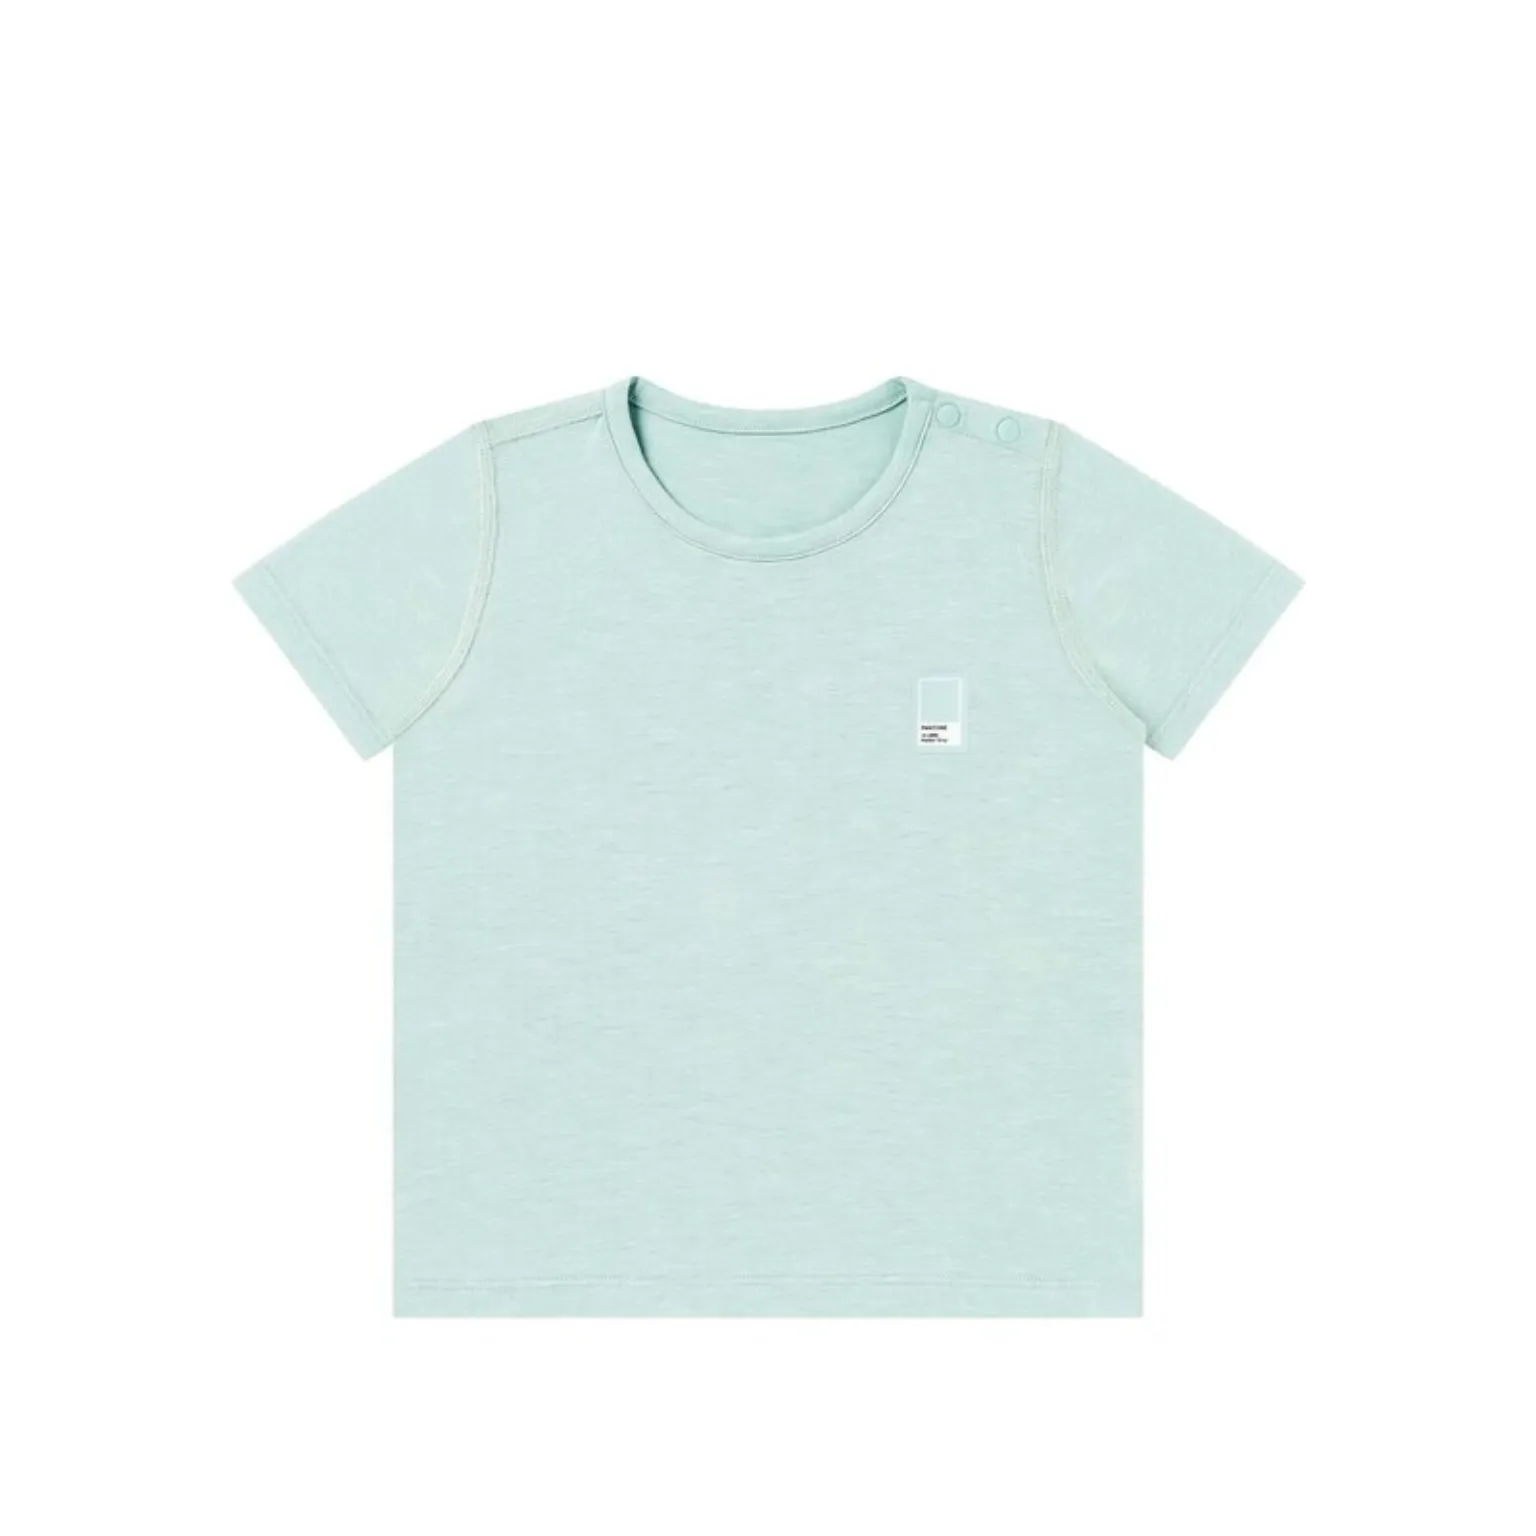 Eco-friendly OEM/ODM manufacturing service for Girls Short Sleeve T-Shirt.